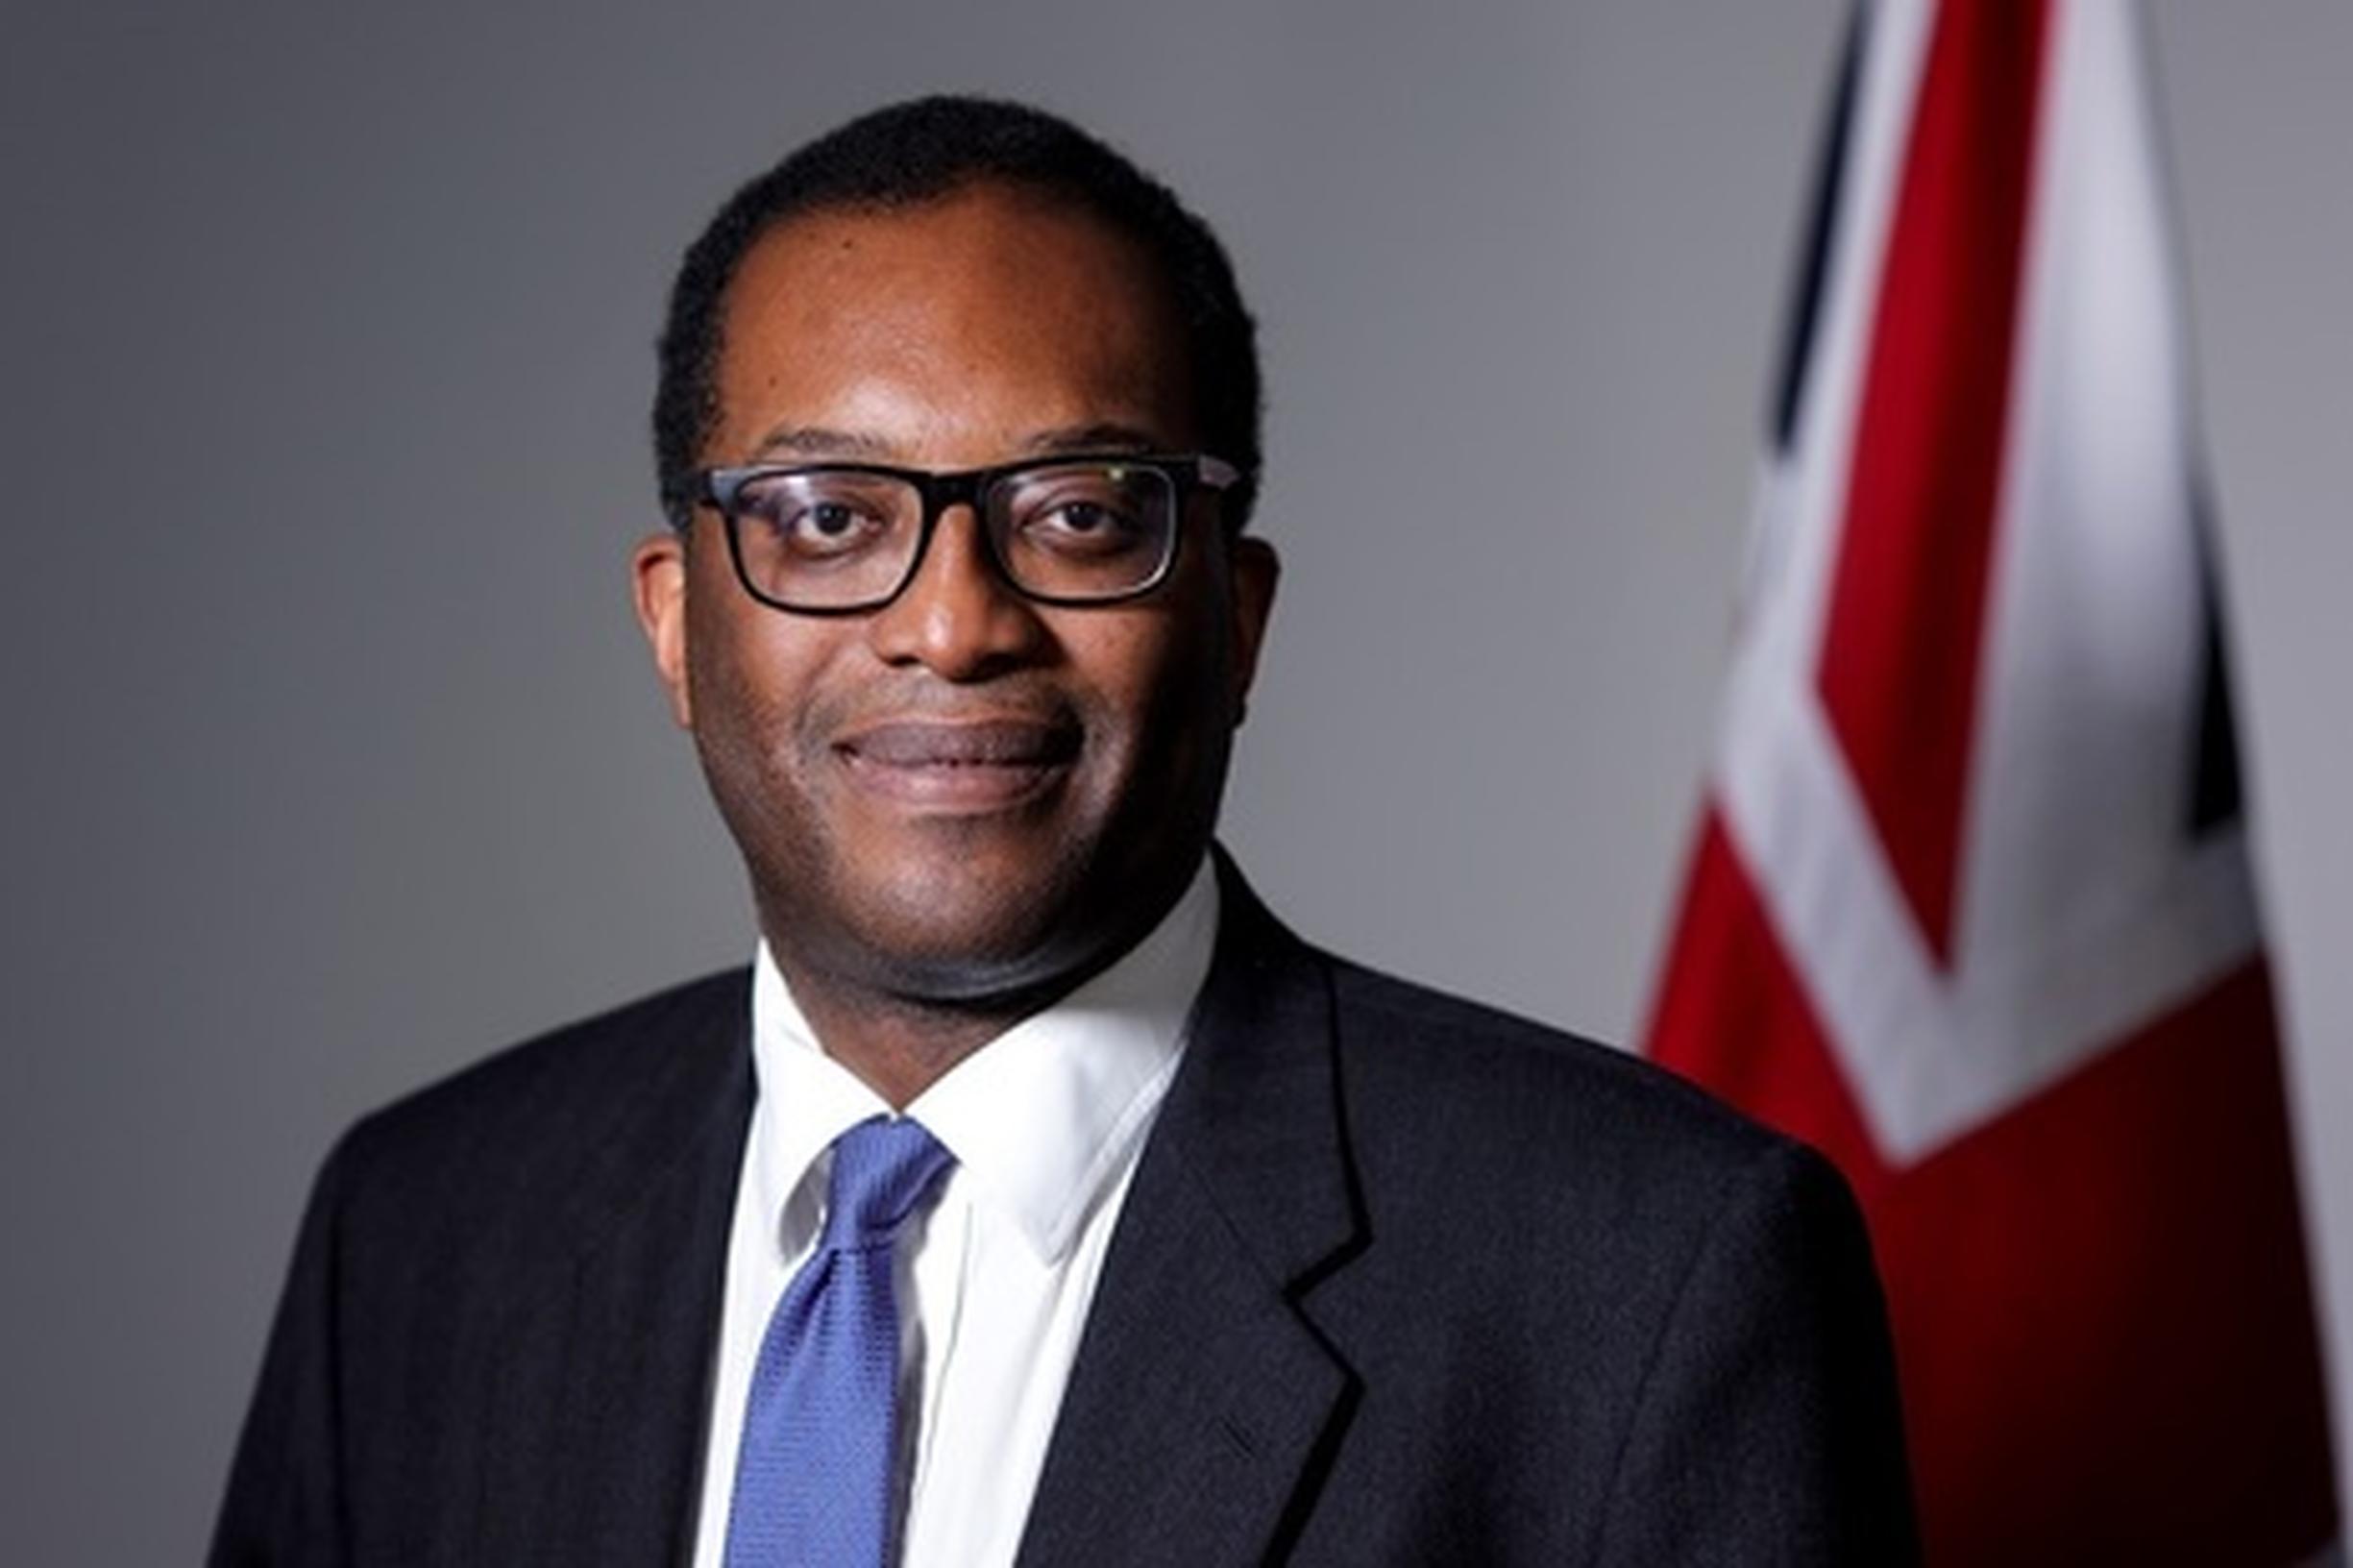 Kwasi Kwarteng: Repealing 1970s-era restrictions will give businesses freedom to access fully skilled staff at speed, all while allowing people to get on with their lives uninterrupted to help keep the economy ticking